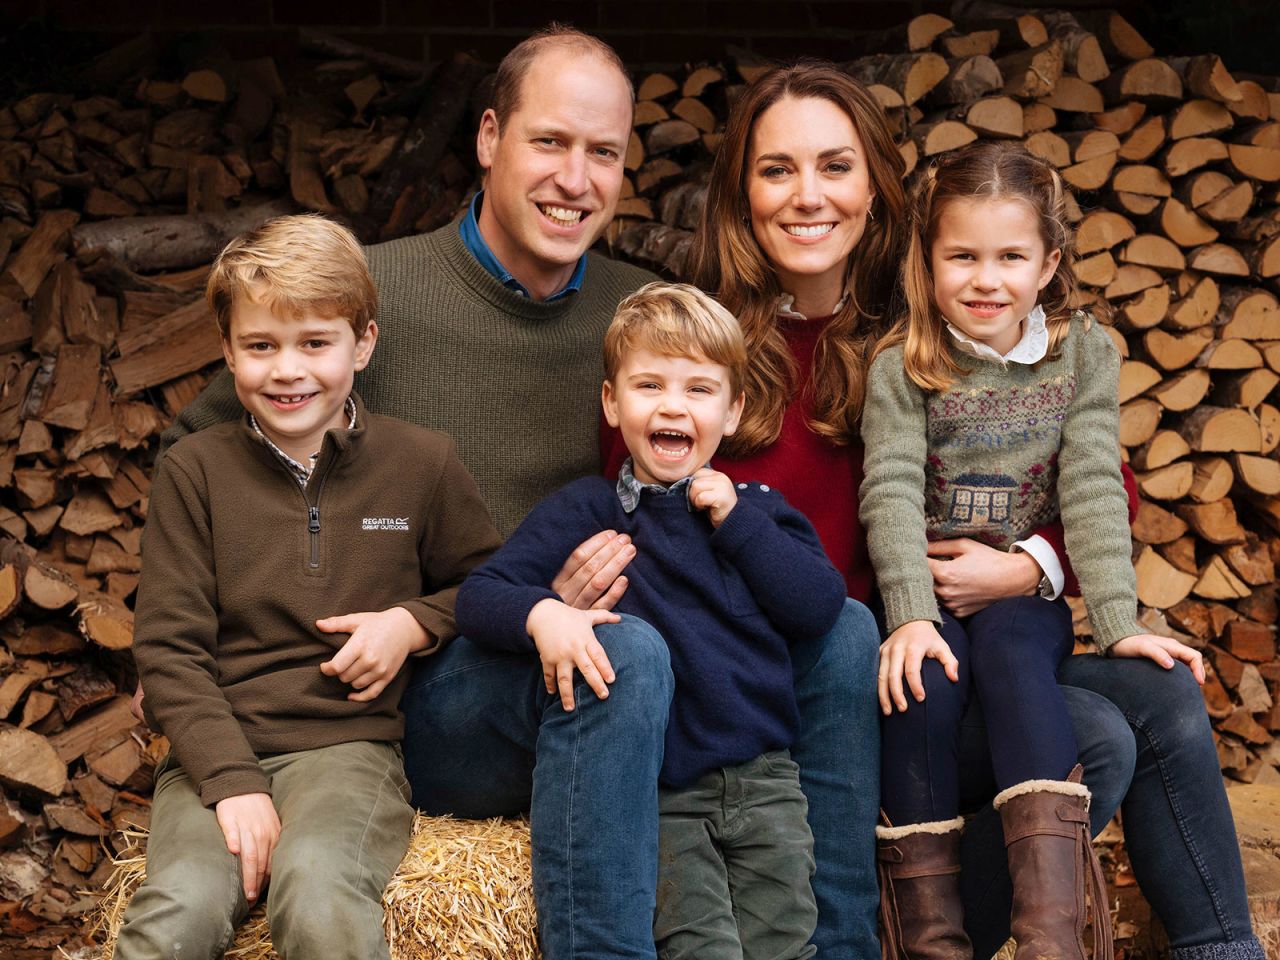 Britain's Prince William and his wife Catherine, the Duchess of Cambridge, are joined by their three children in this image <a href="https://www.cnn.com/2020/12/16/uk/duke-duchess-cambridge-christmas-card-intl-scli-gbr/index.html" target="_blank">that is being used for the family's official Christmas card this year.</a> The children, from left, are George, Louis and Charlotte.